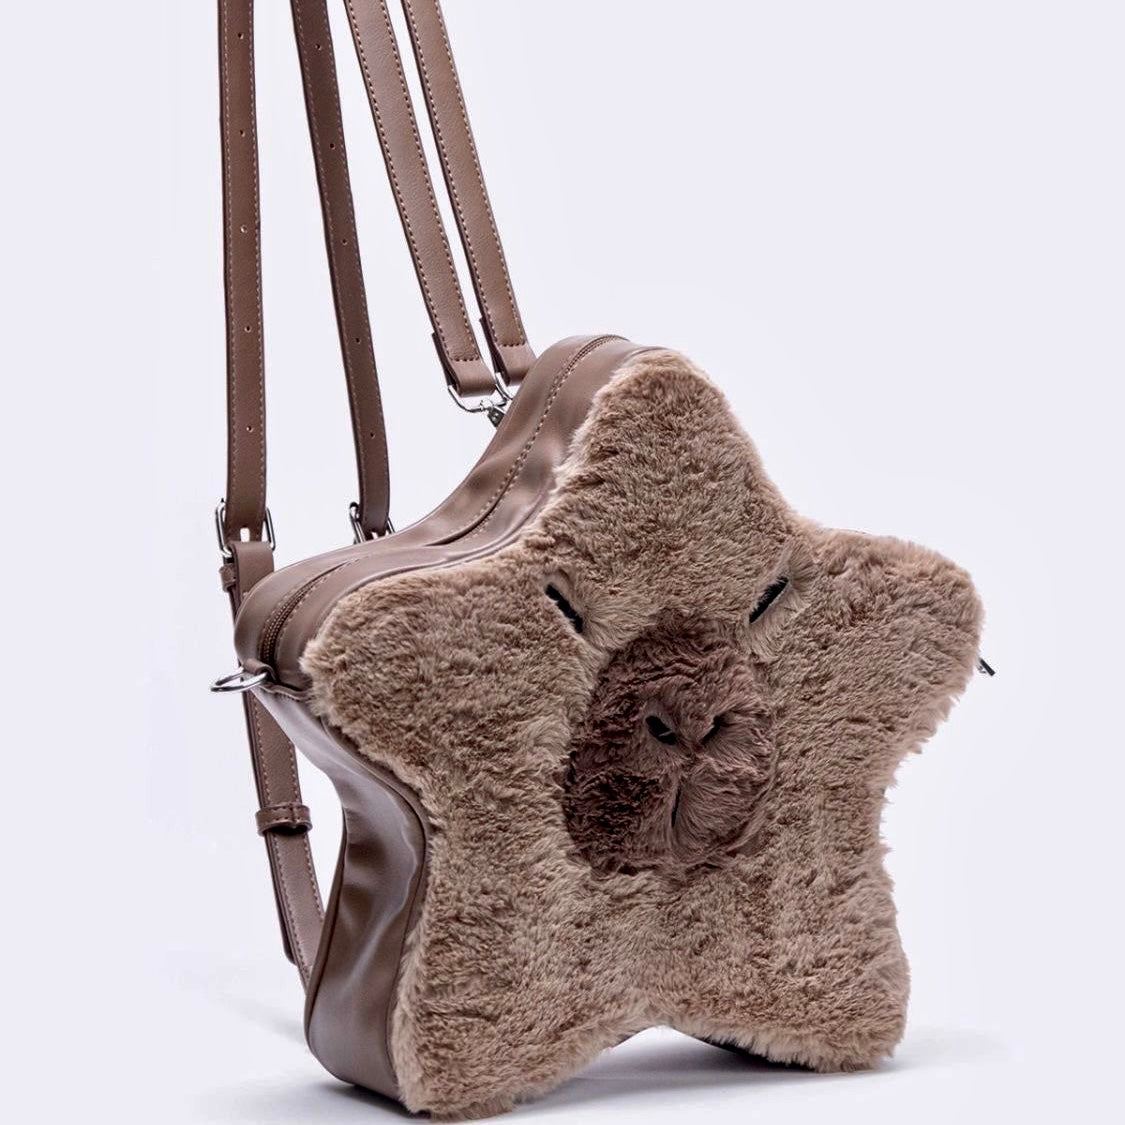 【Ahhkawaii】Original Capybara Cute, Ugly-Cute Plush Starry Backpack, New Arrival for Autumn and Winter